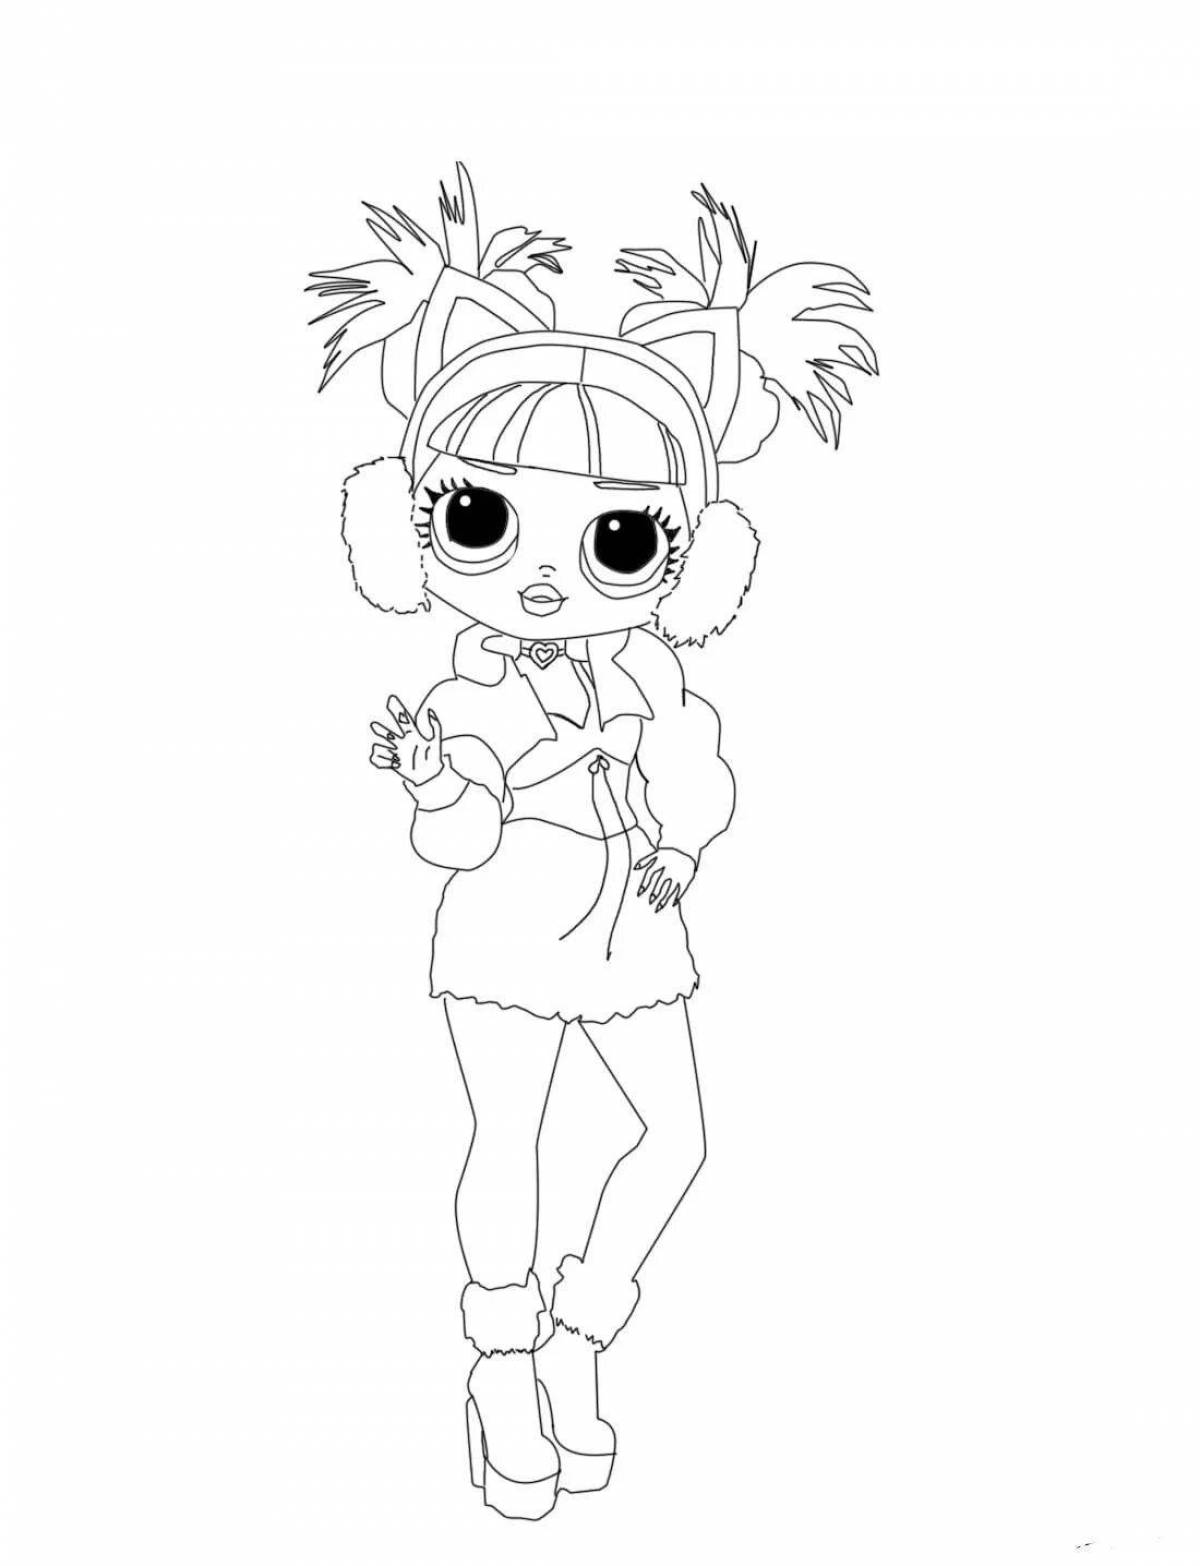 Cute doll lol teen coloring page